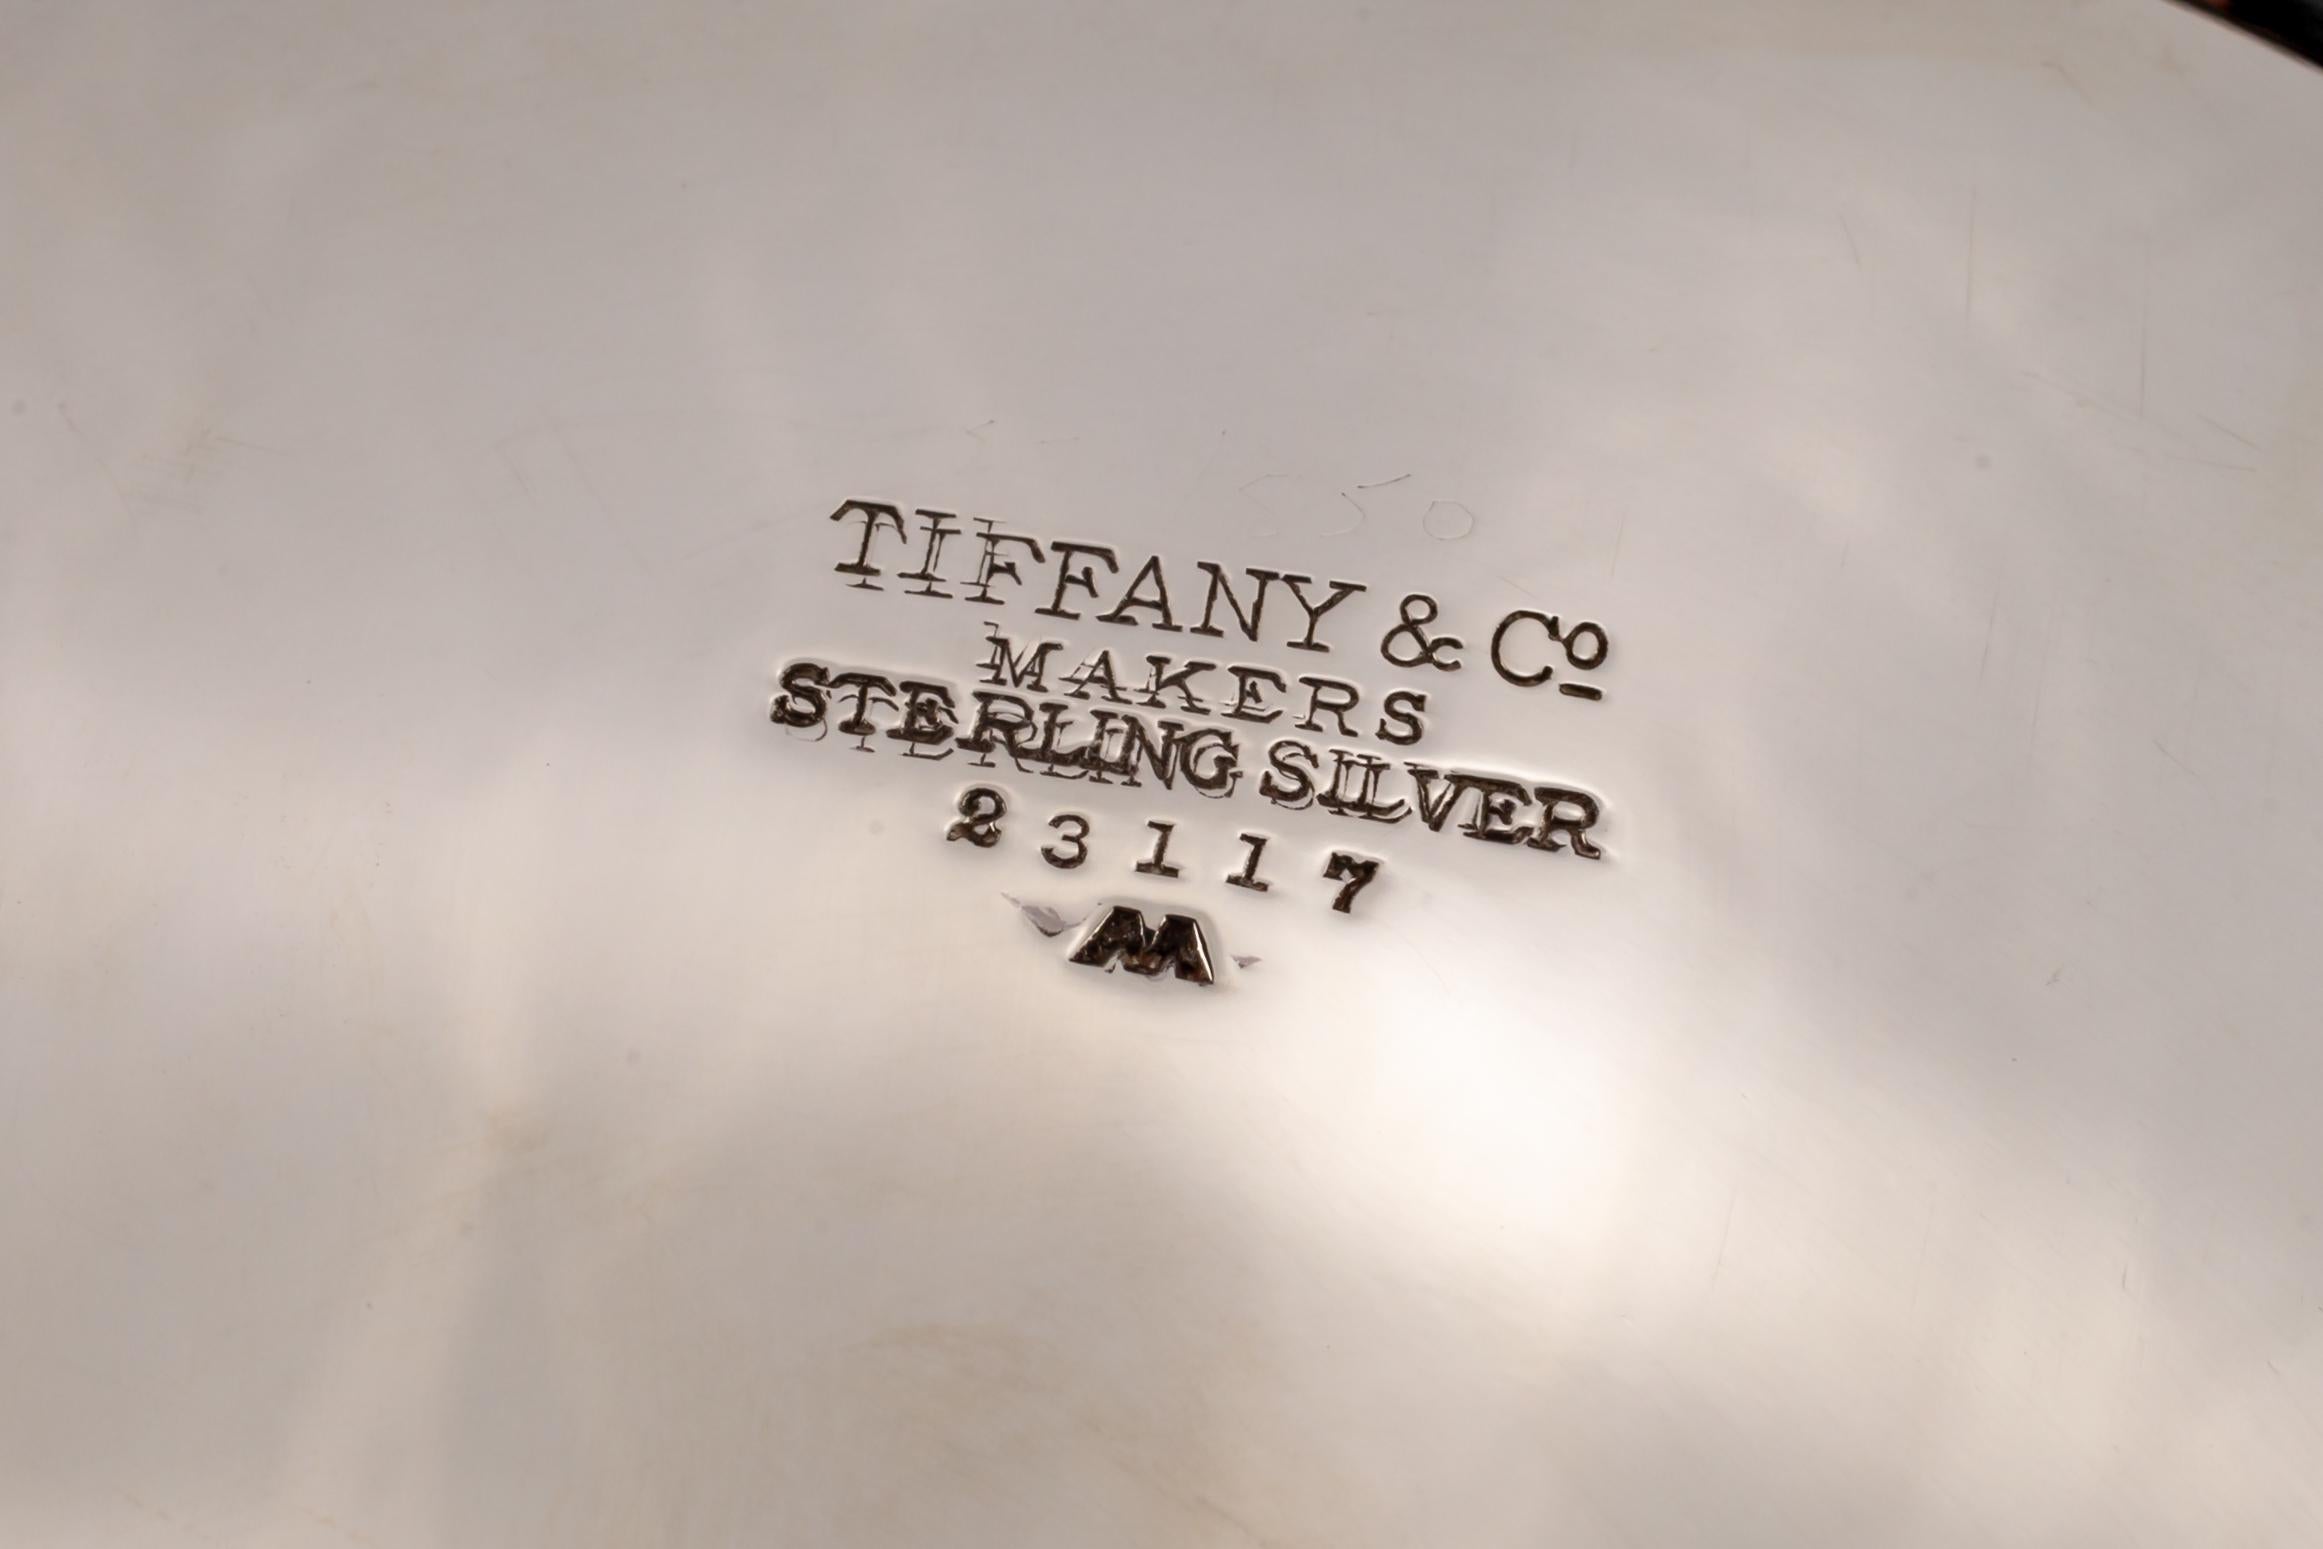 Modern Tiffany & Co. Makers Sterling Silver Windham 8